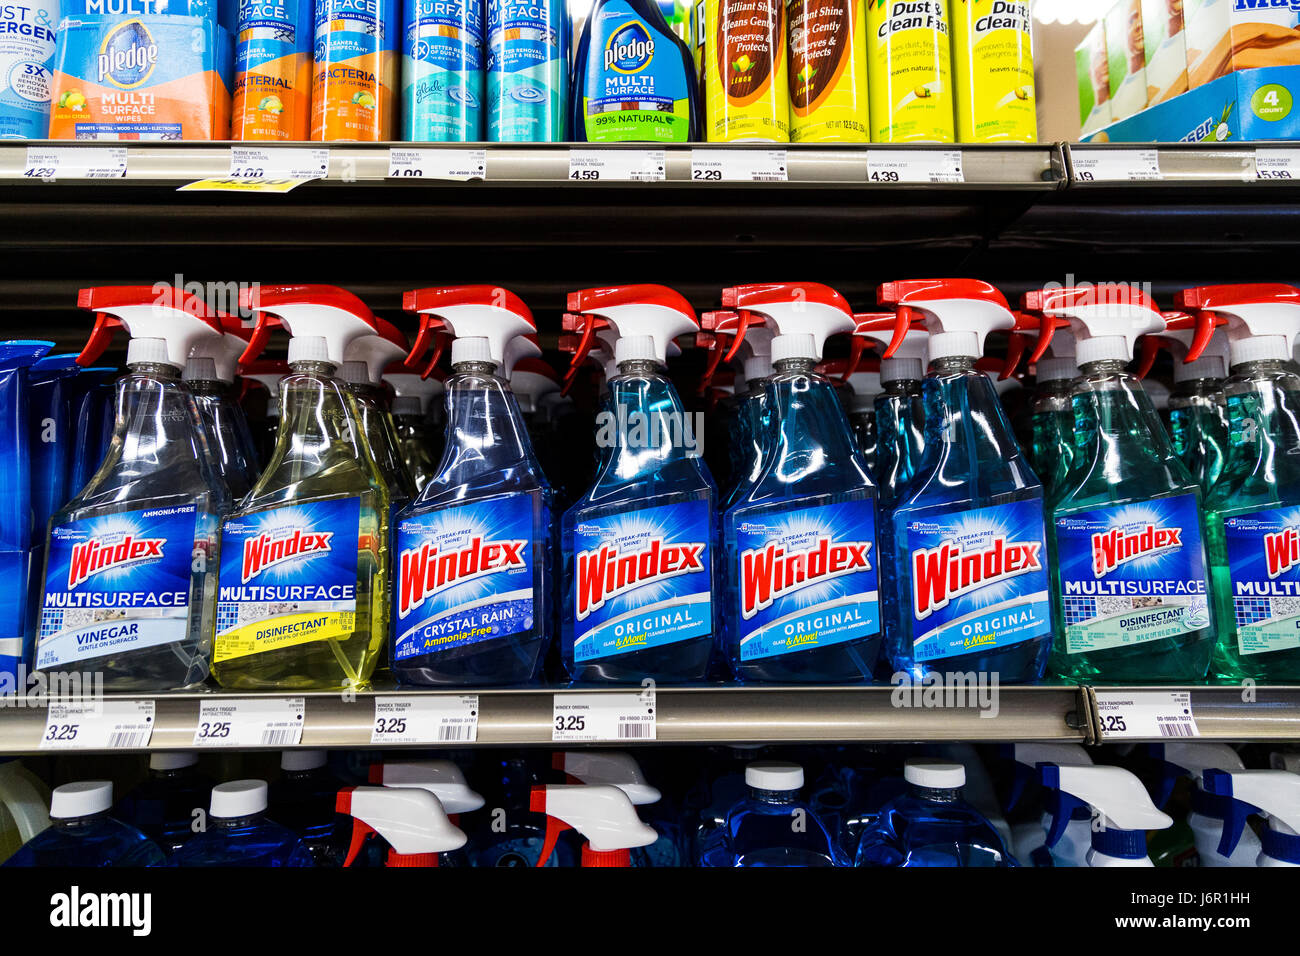 Bottles of Windex brand spray cleaners on a grocery store shelf Stock Photo